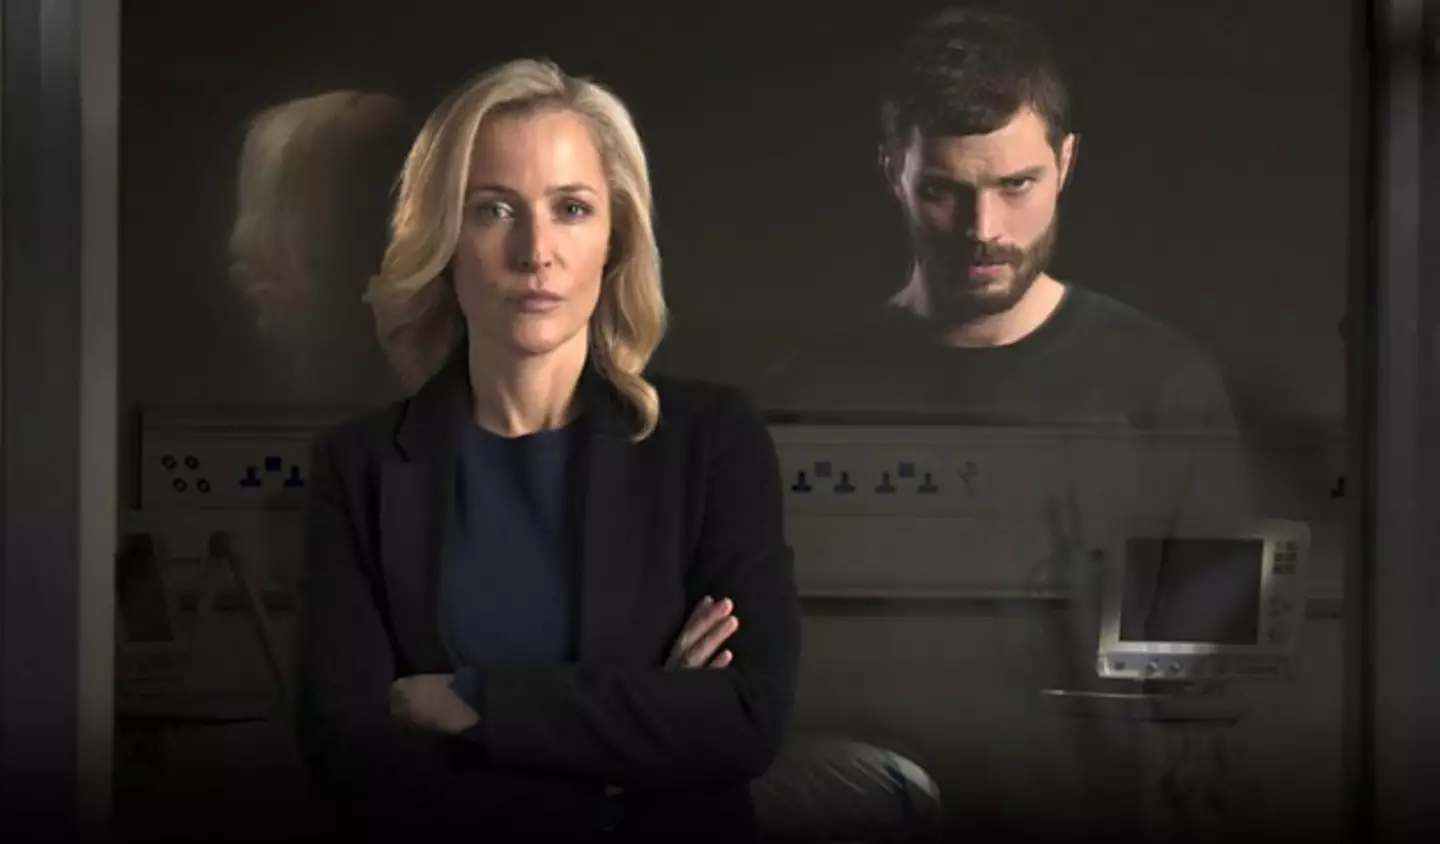 The series stars the likes of Gillian Anderson and Jamie Dornan.